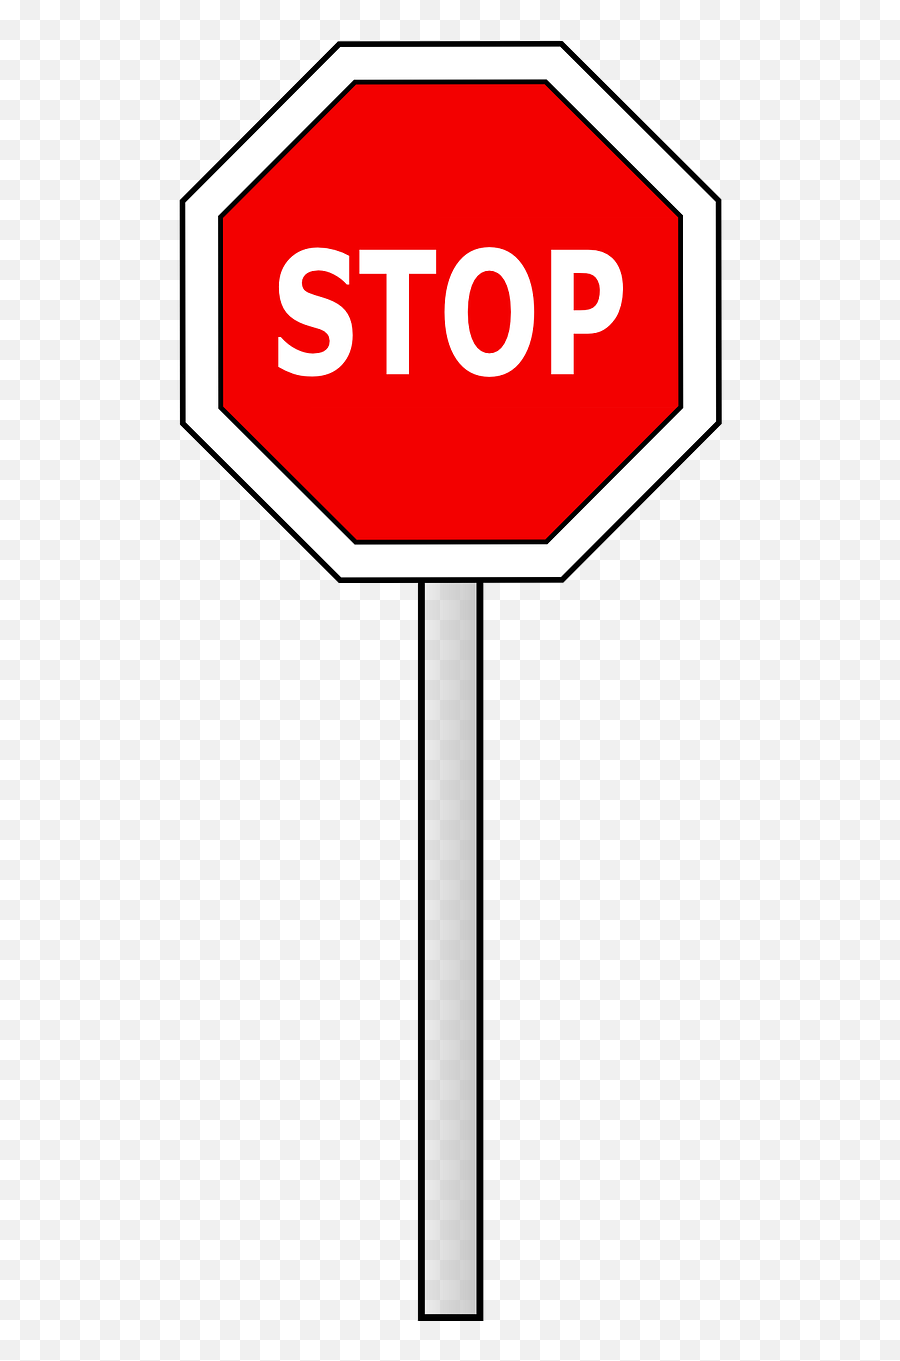 Free Street Sign Png Download Clip Art - Clipart Of Stop Sign,Street ...